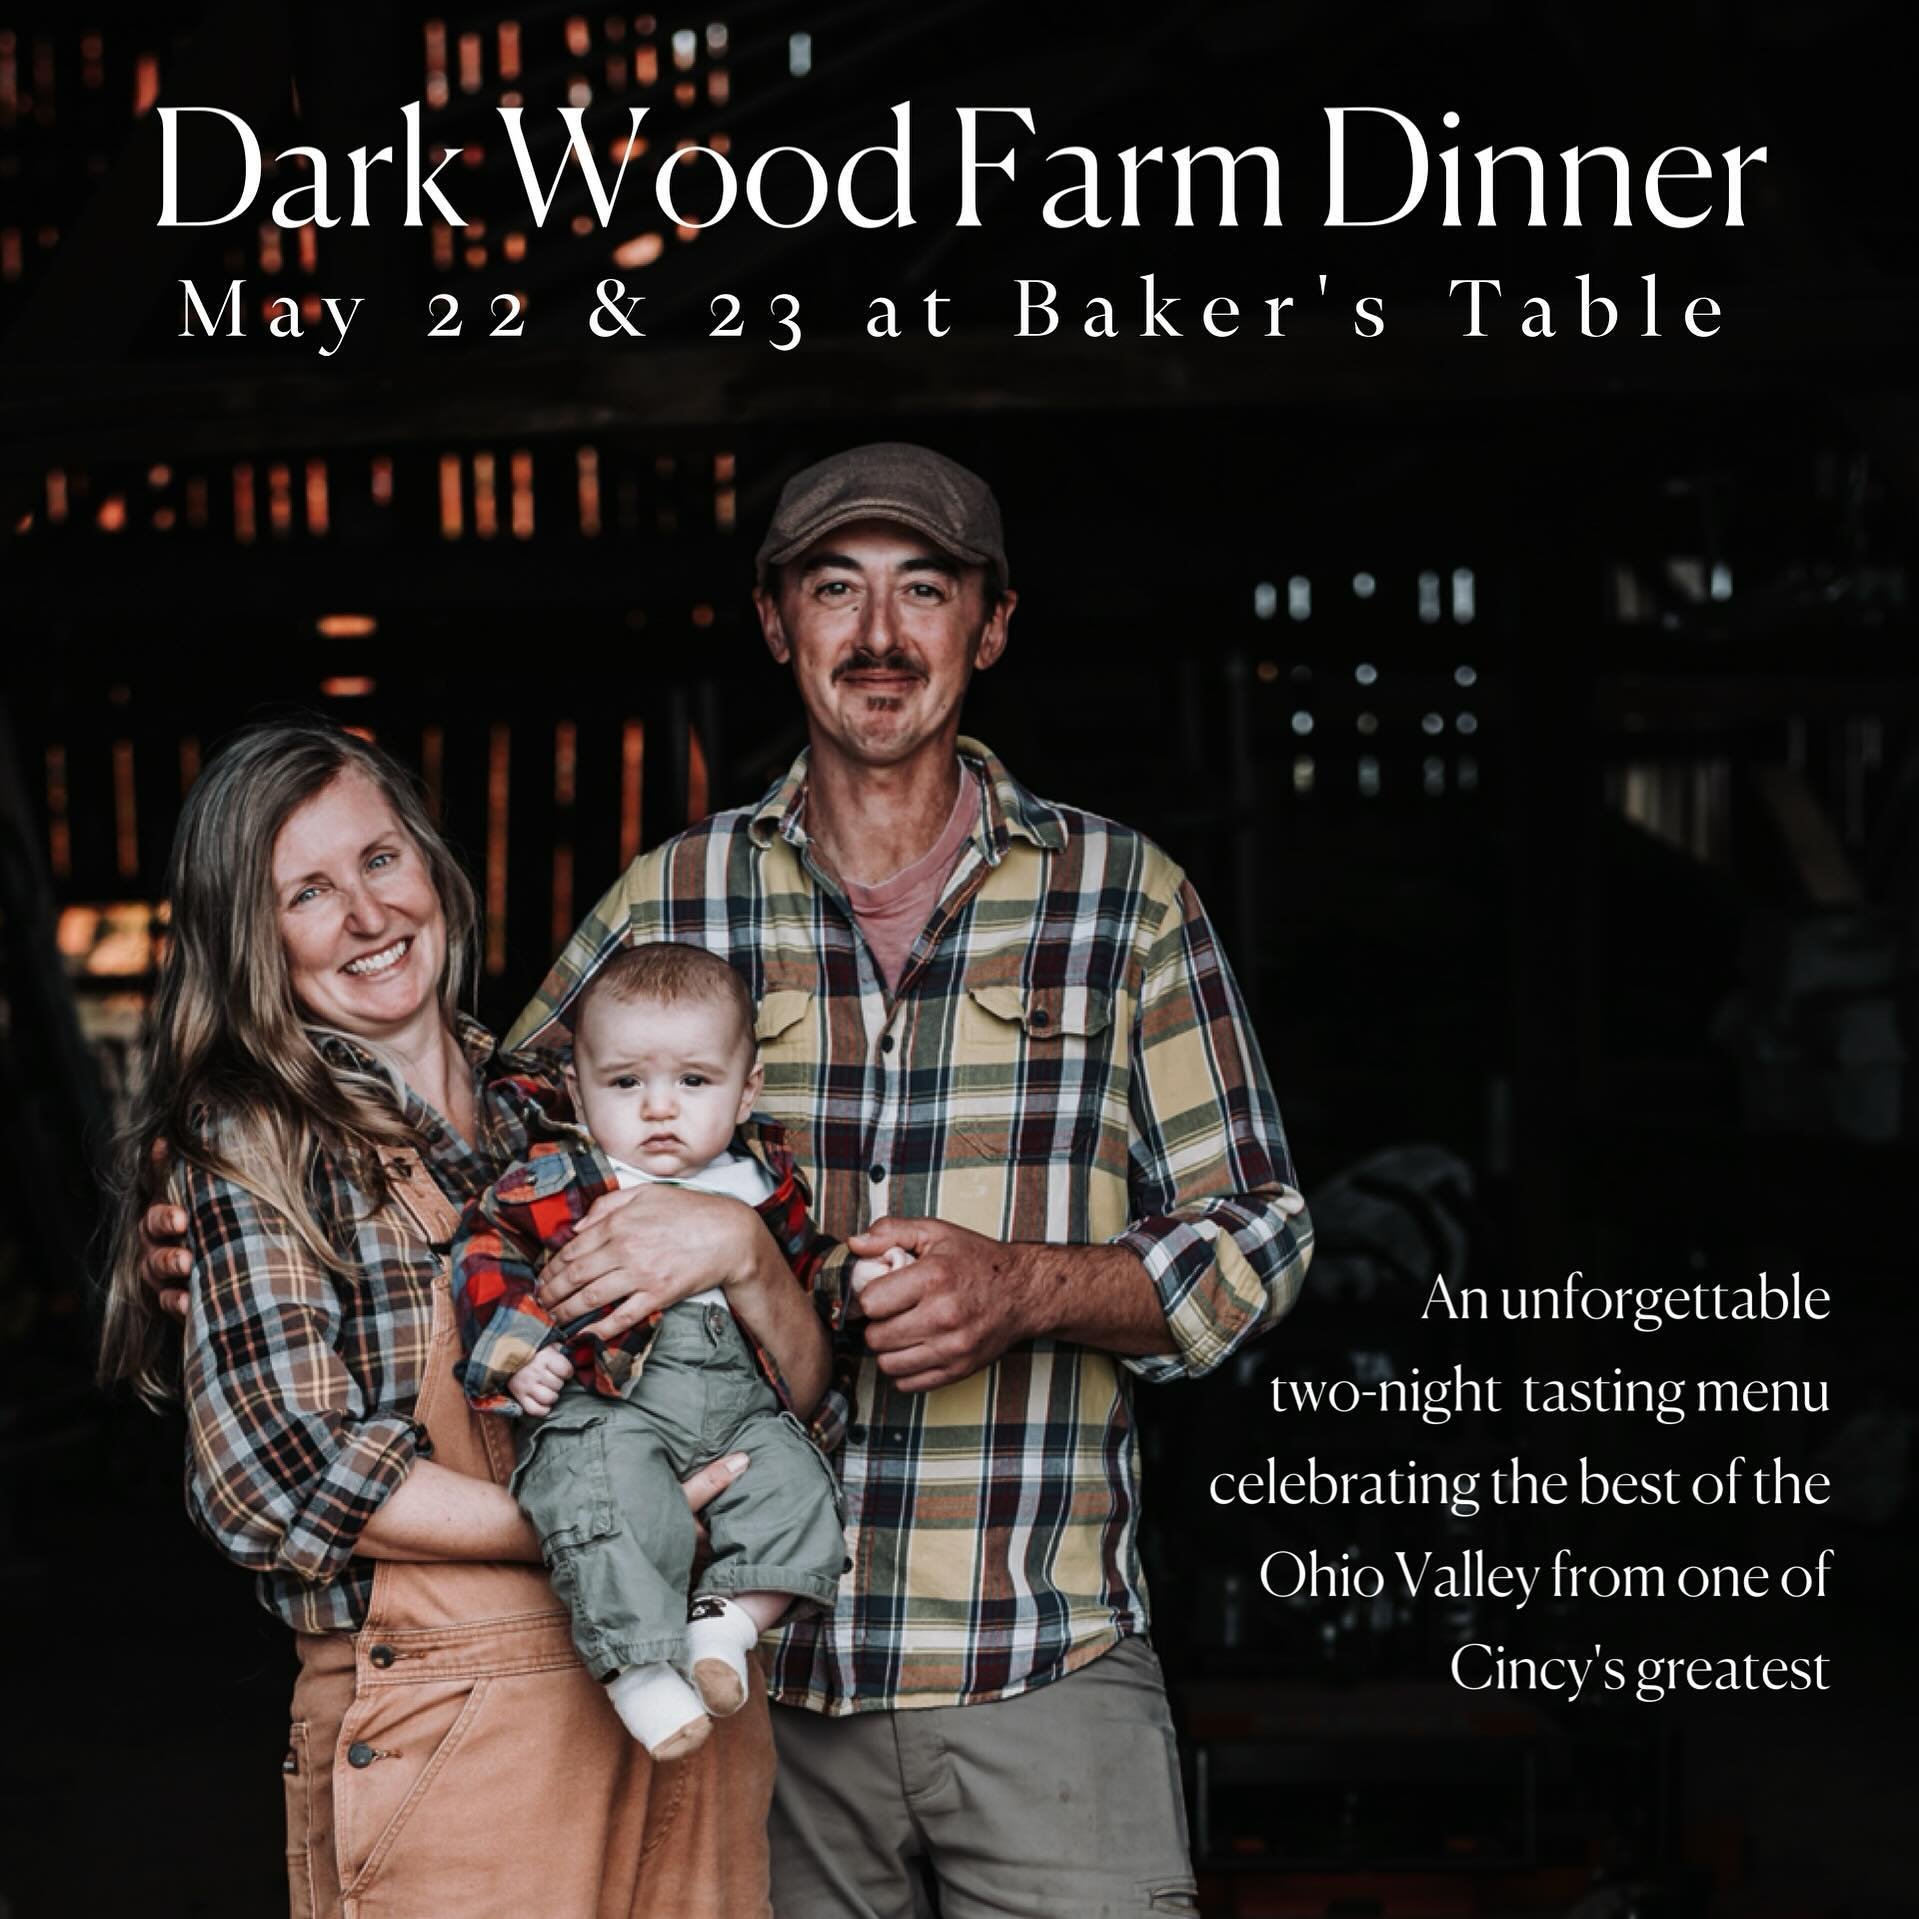 Seven years ago our owner, Chef Dave, met farmer Annie Woods at the market at Findlay Market. She is the proprietor of Dark Wood Farms, and her world-class produce is the inspiration behind opening the Baker&rsquo;s Table. It continues to inspire us 